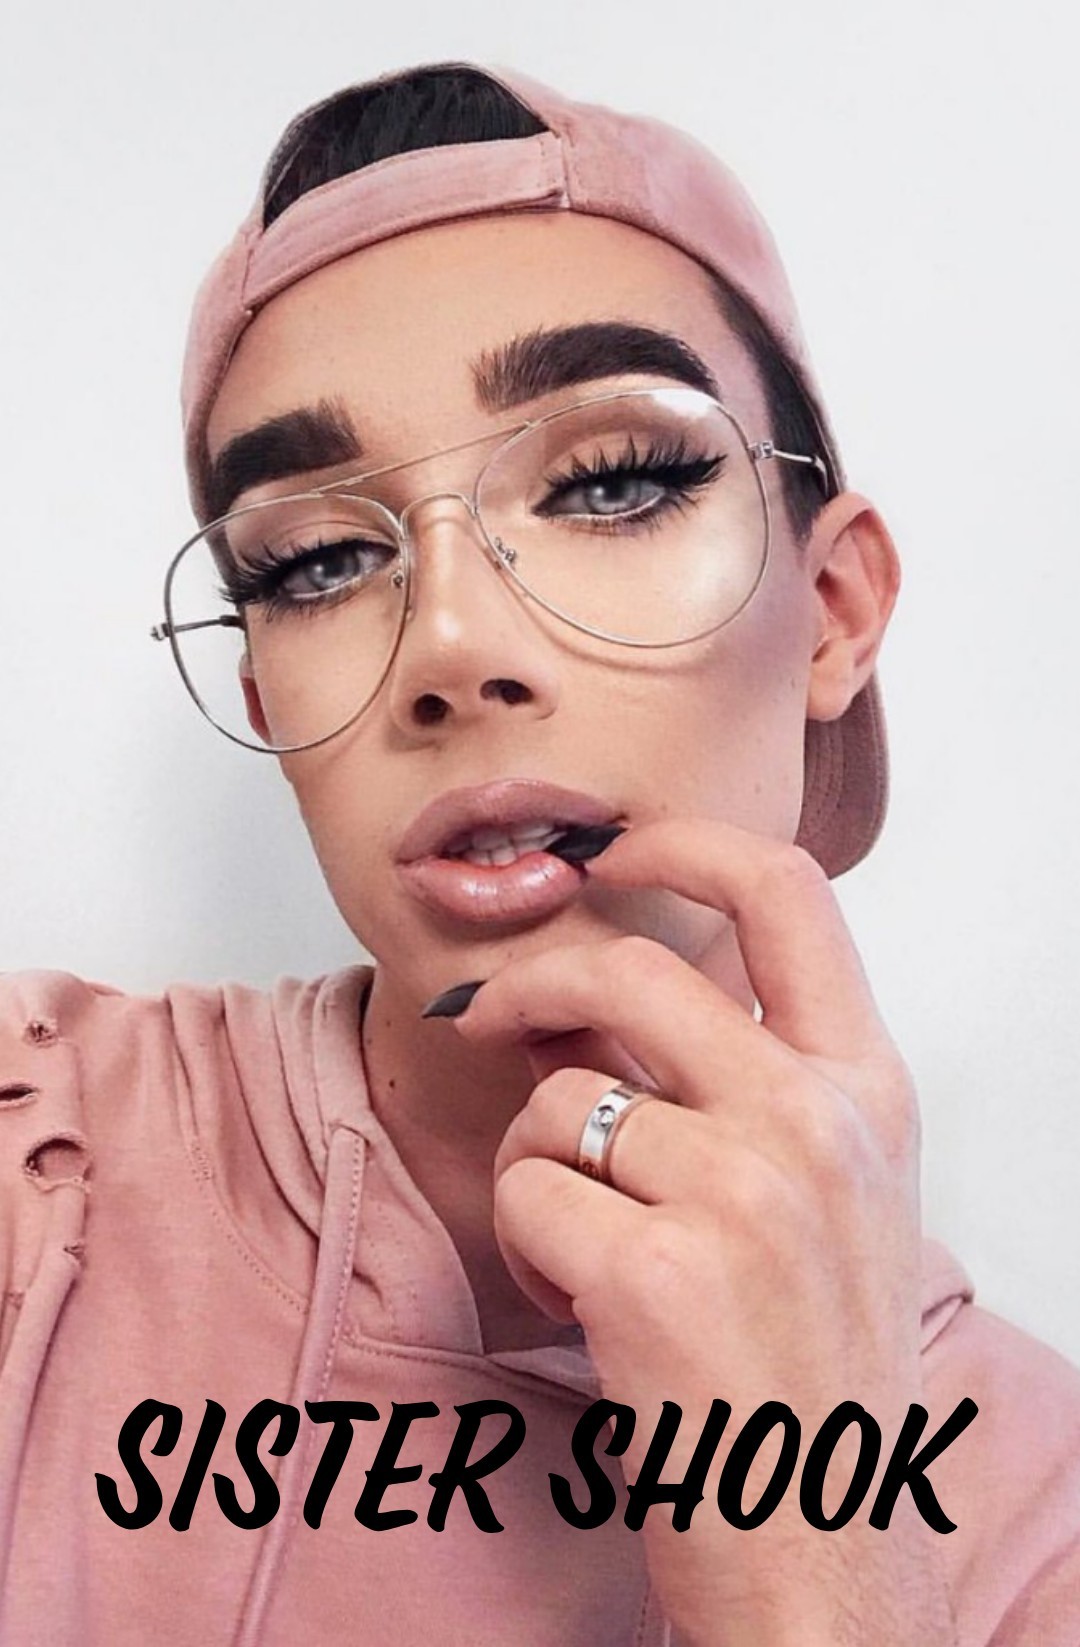 click here
Hey sisters it's James Charles here so glad to have an account on pic collage so my younger viewers have a chance to follow me and get involved in giveaways!!